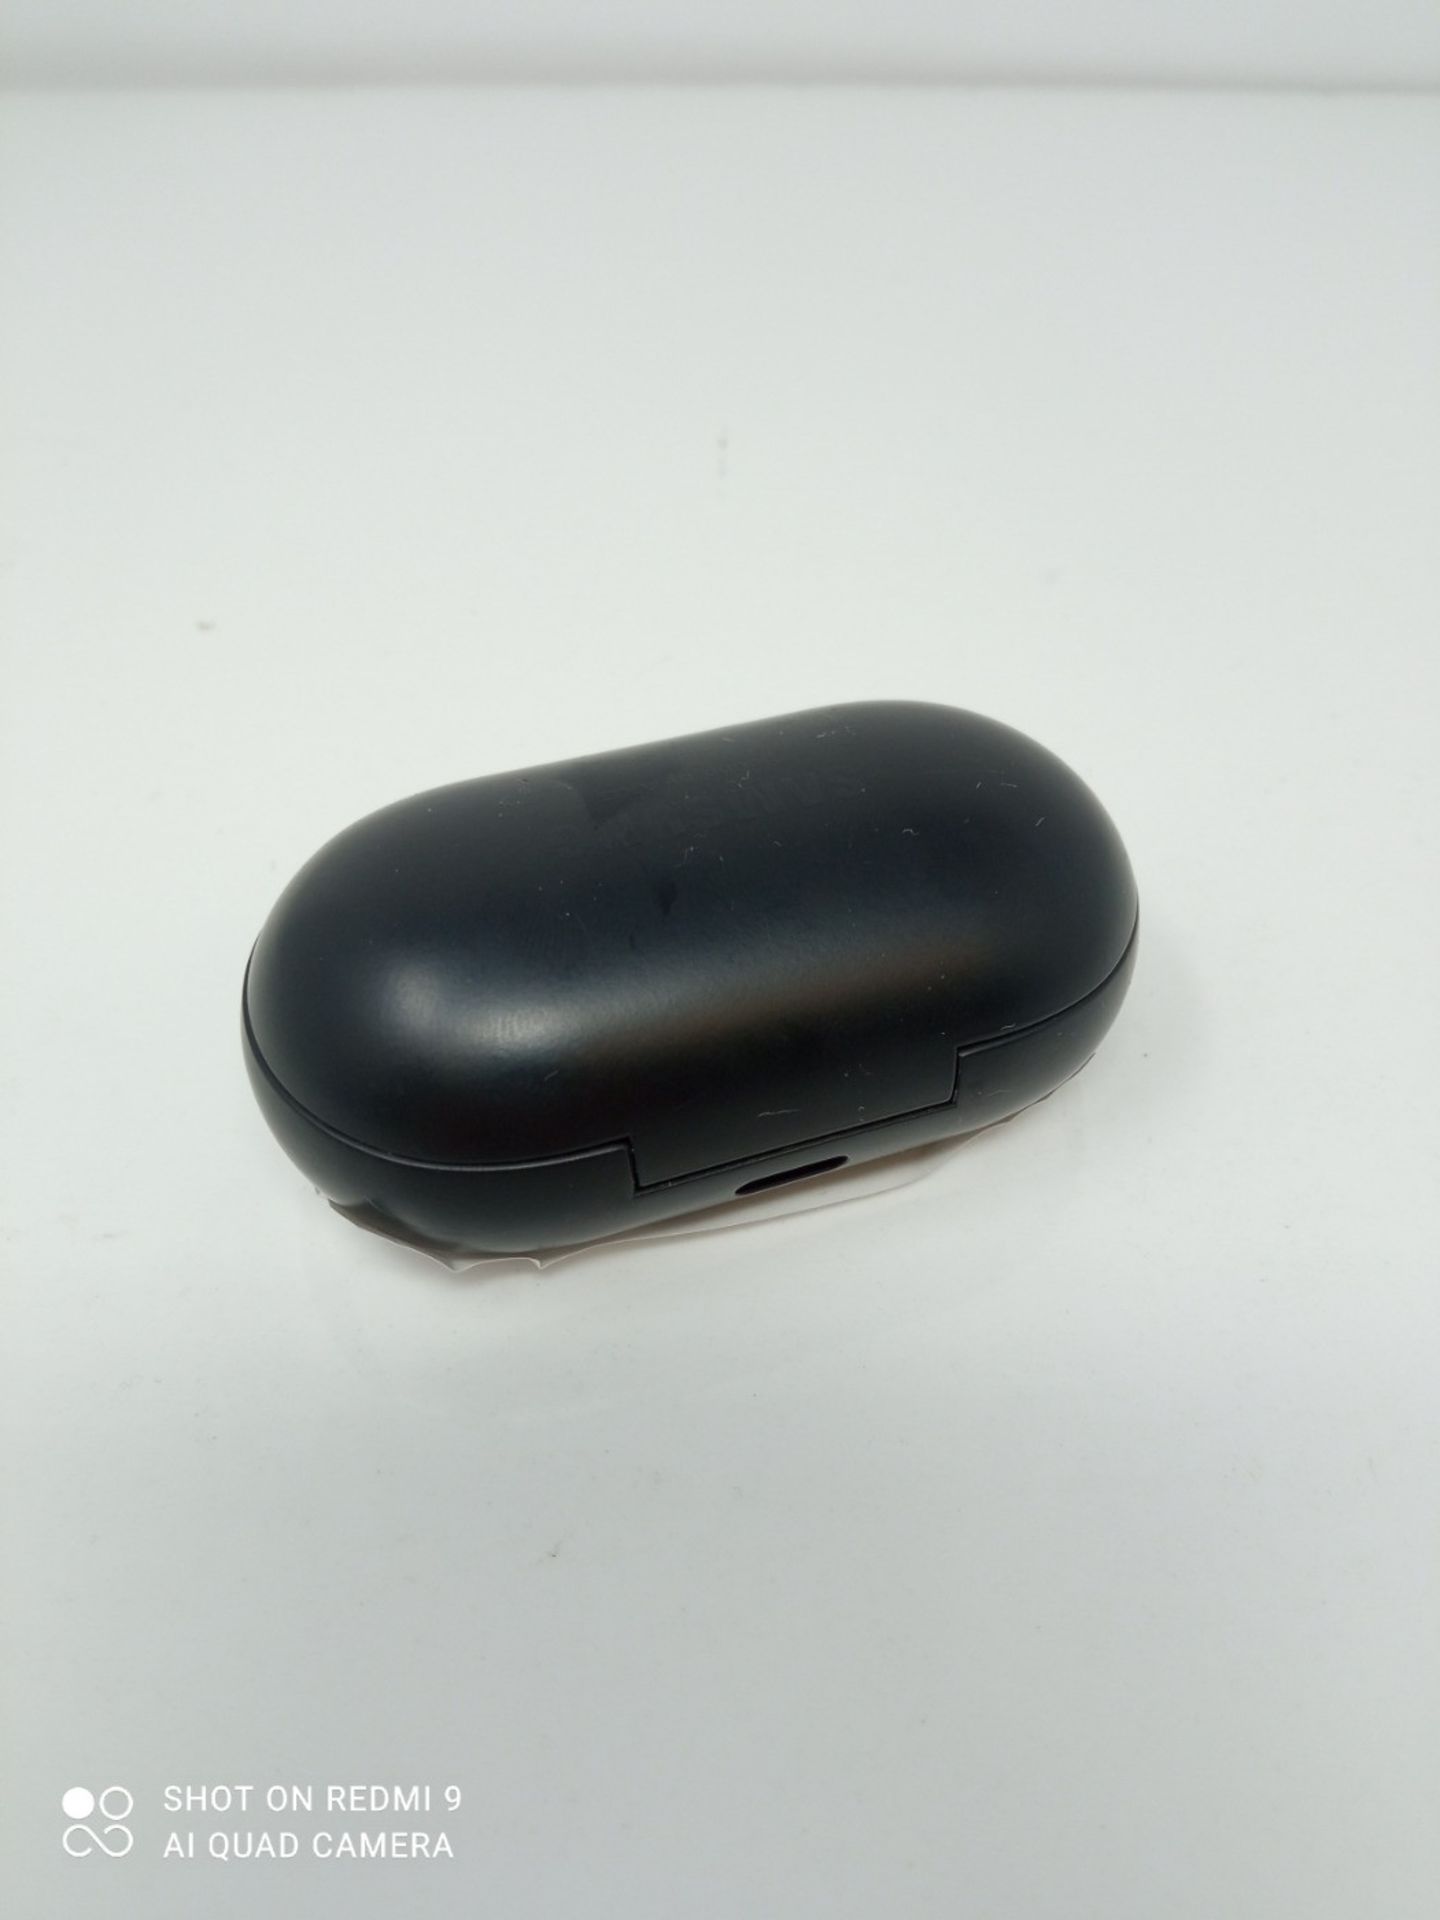 Samsung Galaxy Buds SM-R170 Charging Case Only - Black - Image 2 of 2